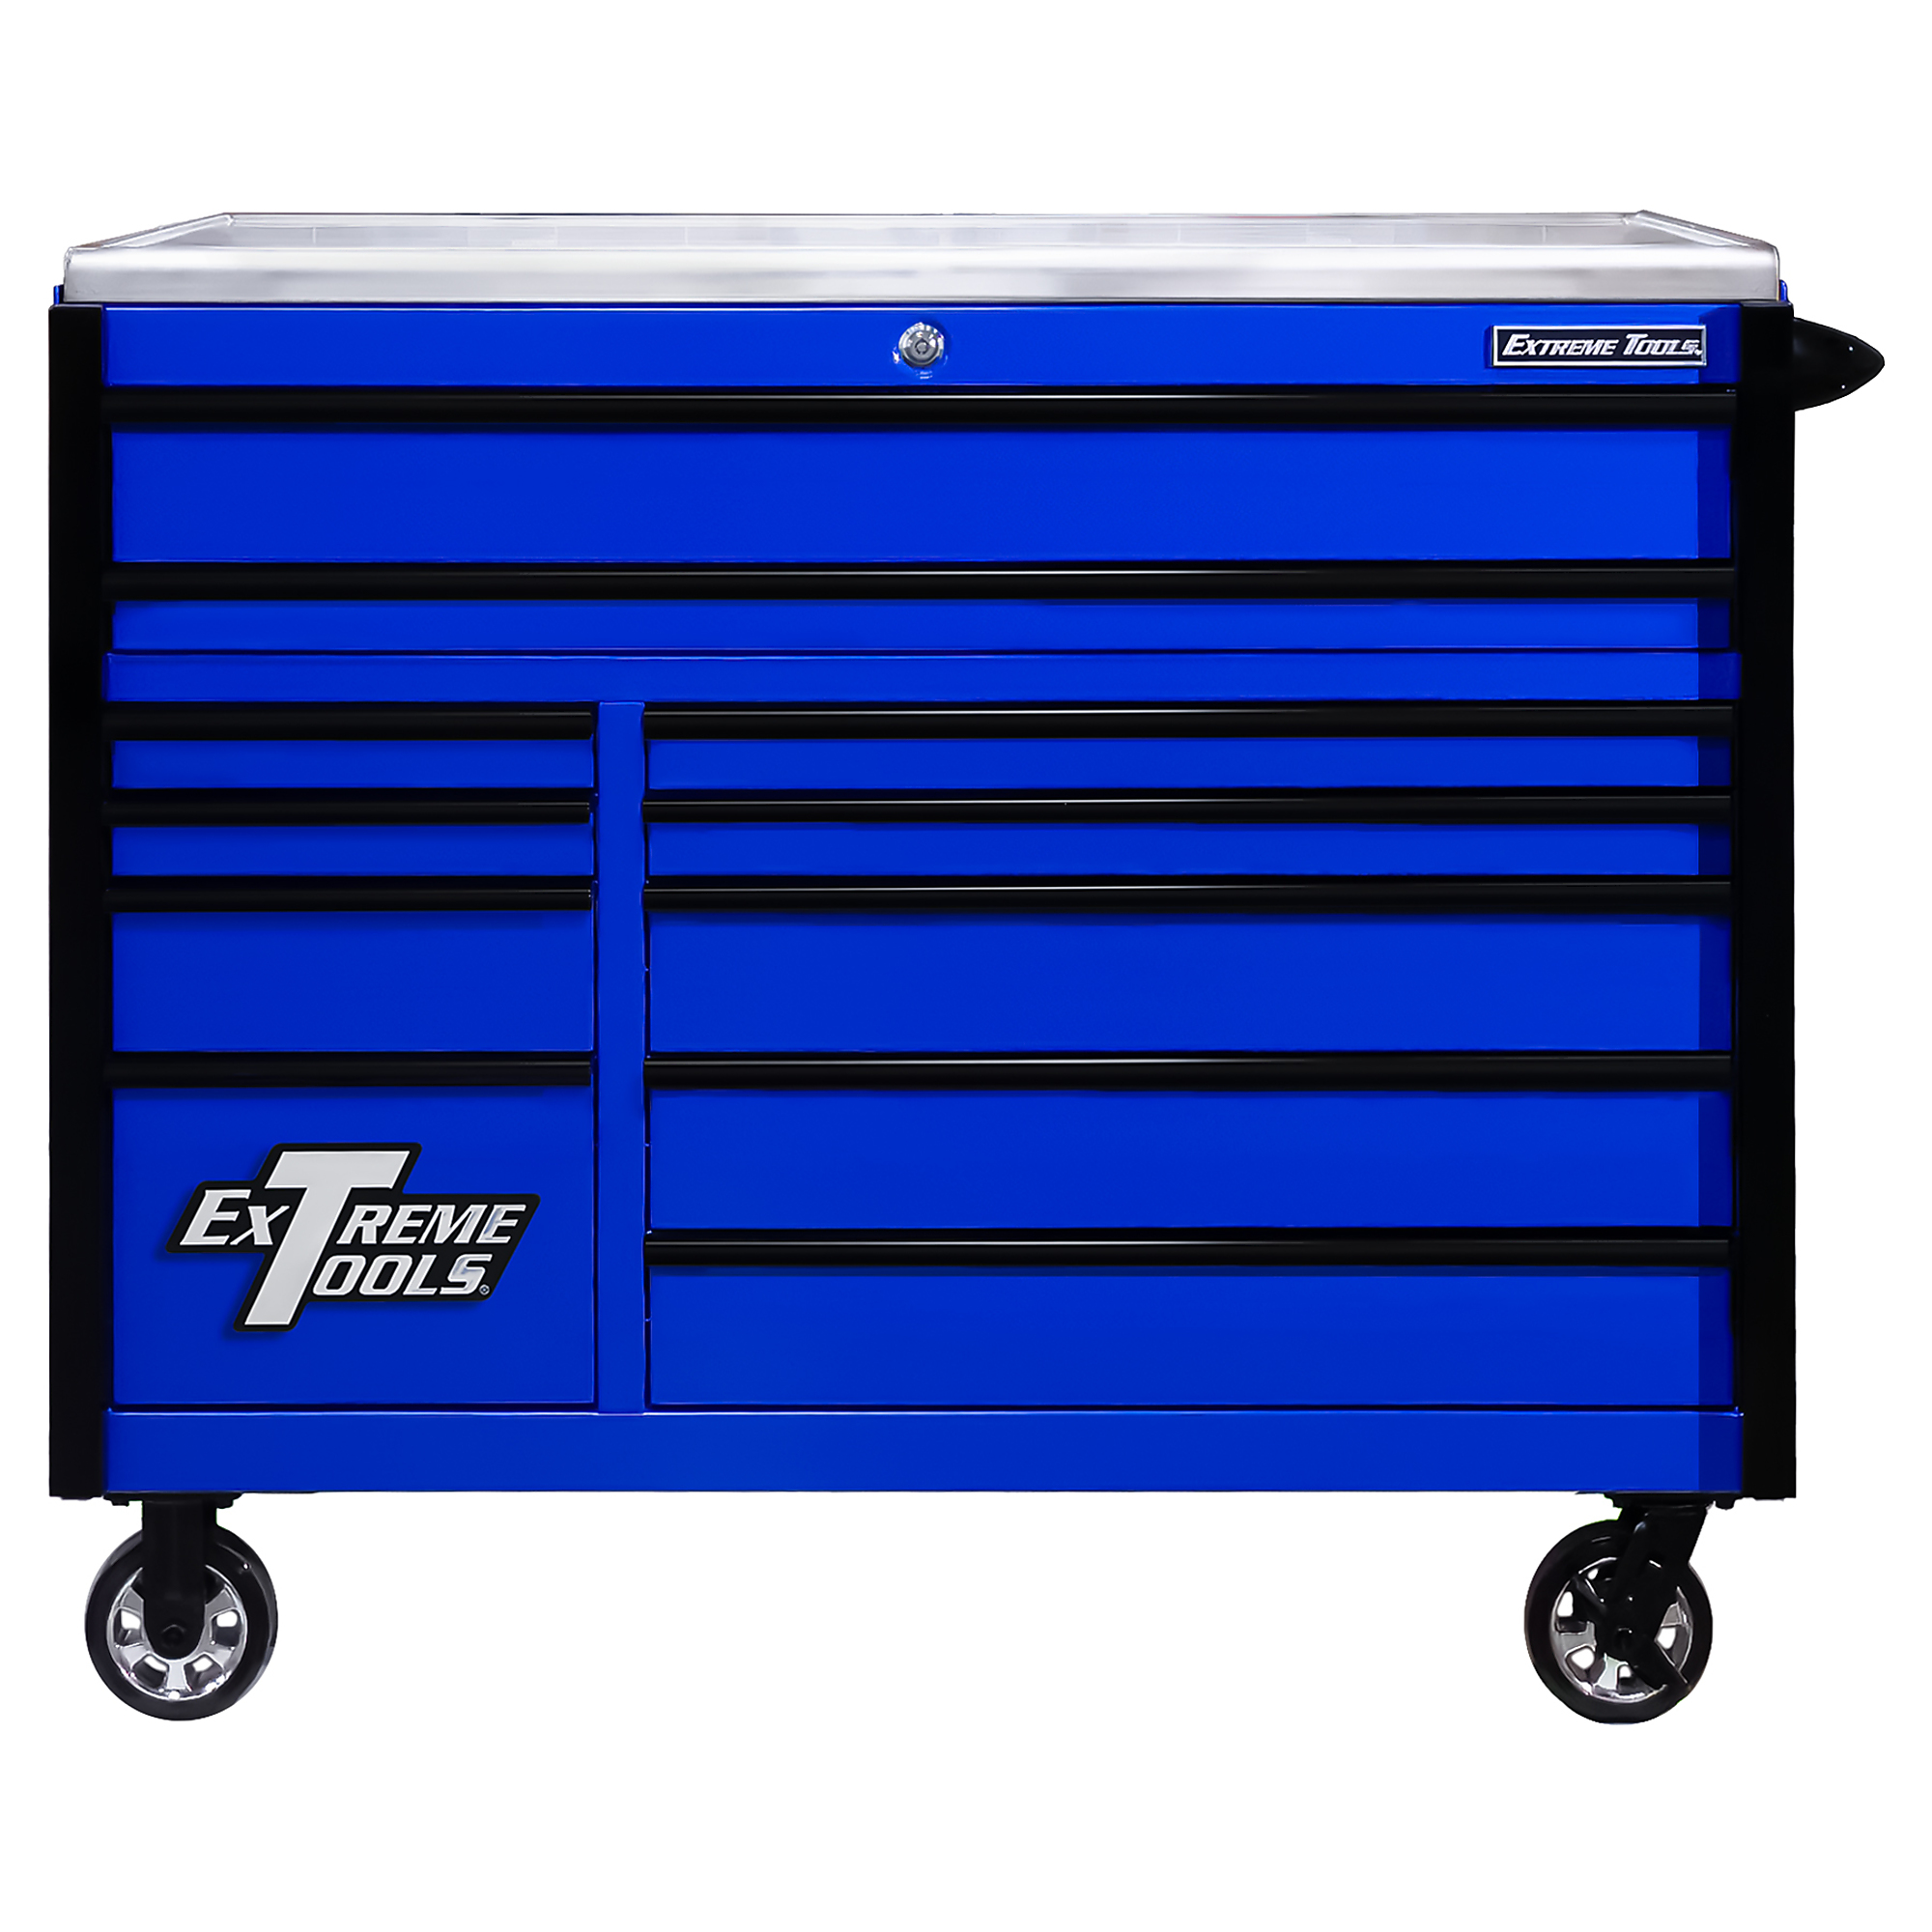 Extreme Tools, EXQ Pro Roller Cab, 55Inch x 30Inch, 11-Dr, BL/BK Trim, Width 55 in, Height 46.62 in, Color Blue, Model EX5511RCQBLBK